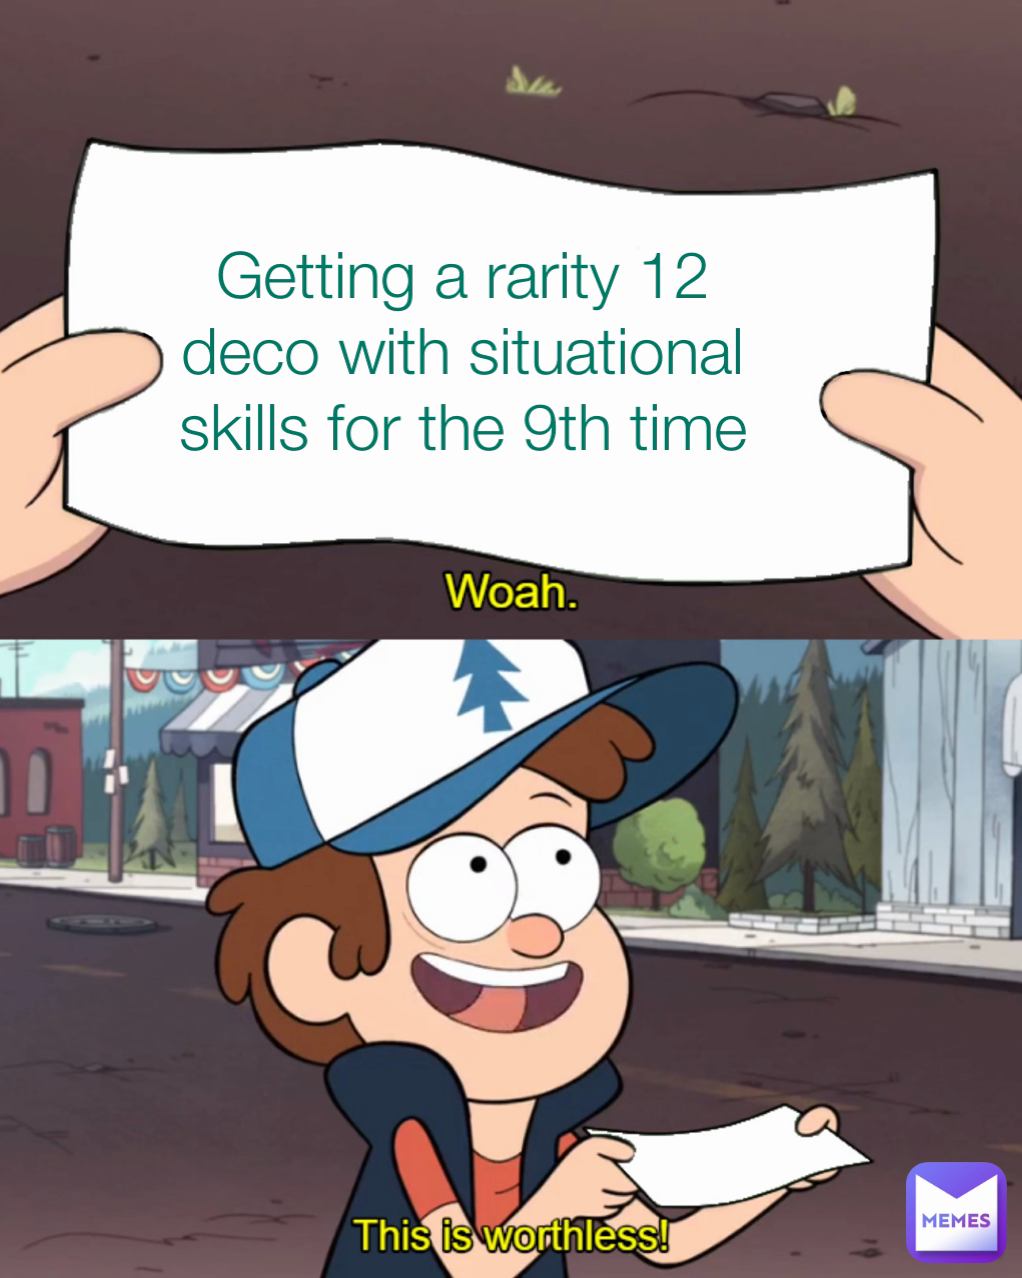 Getting a rarity 12 deco with situational skills for the 9th time